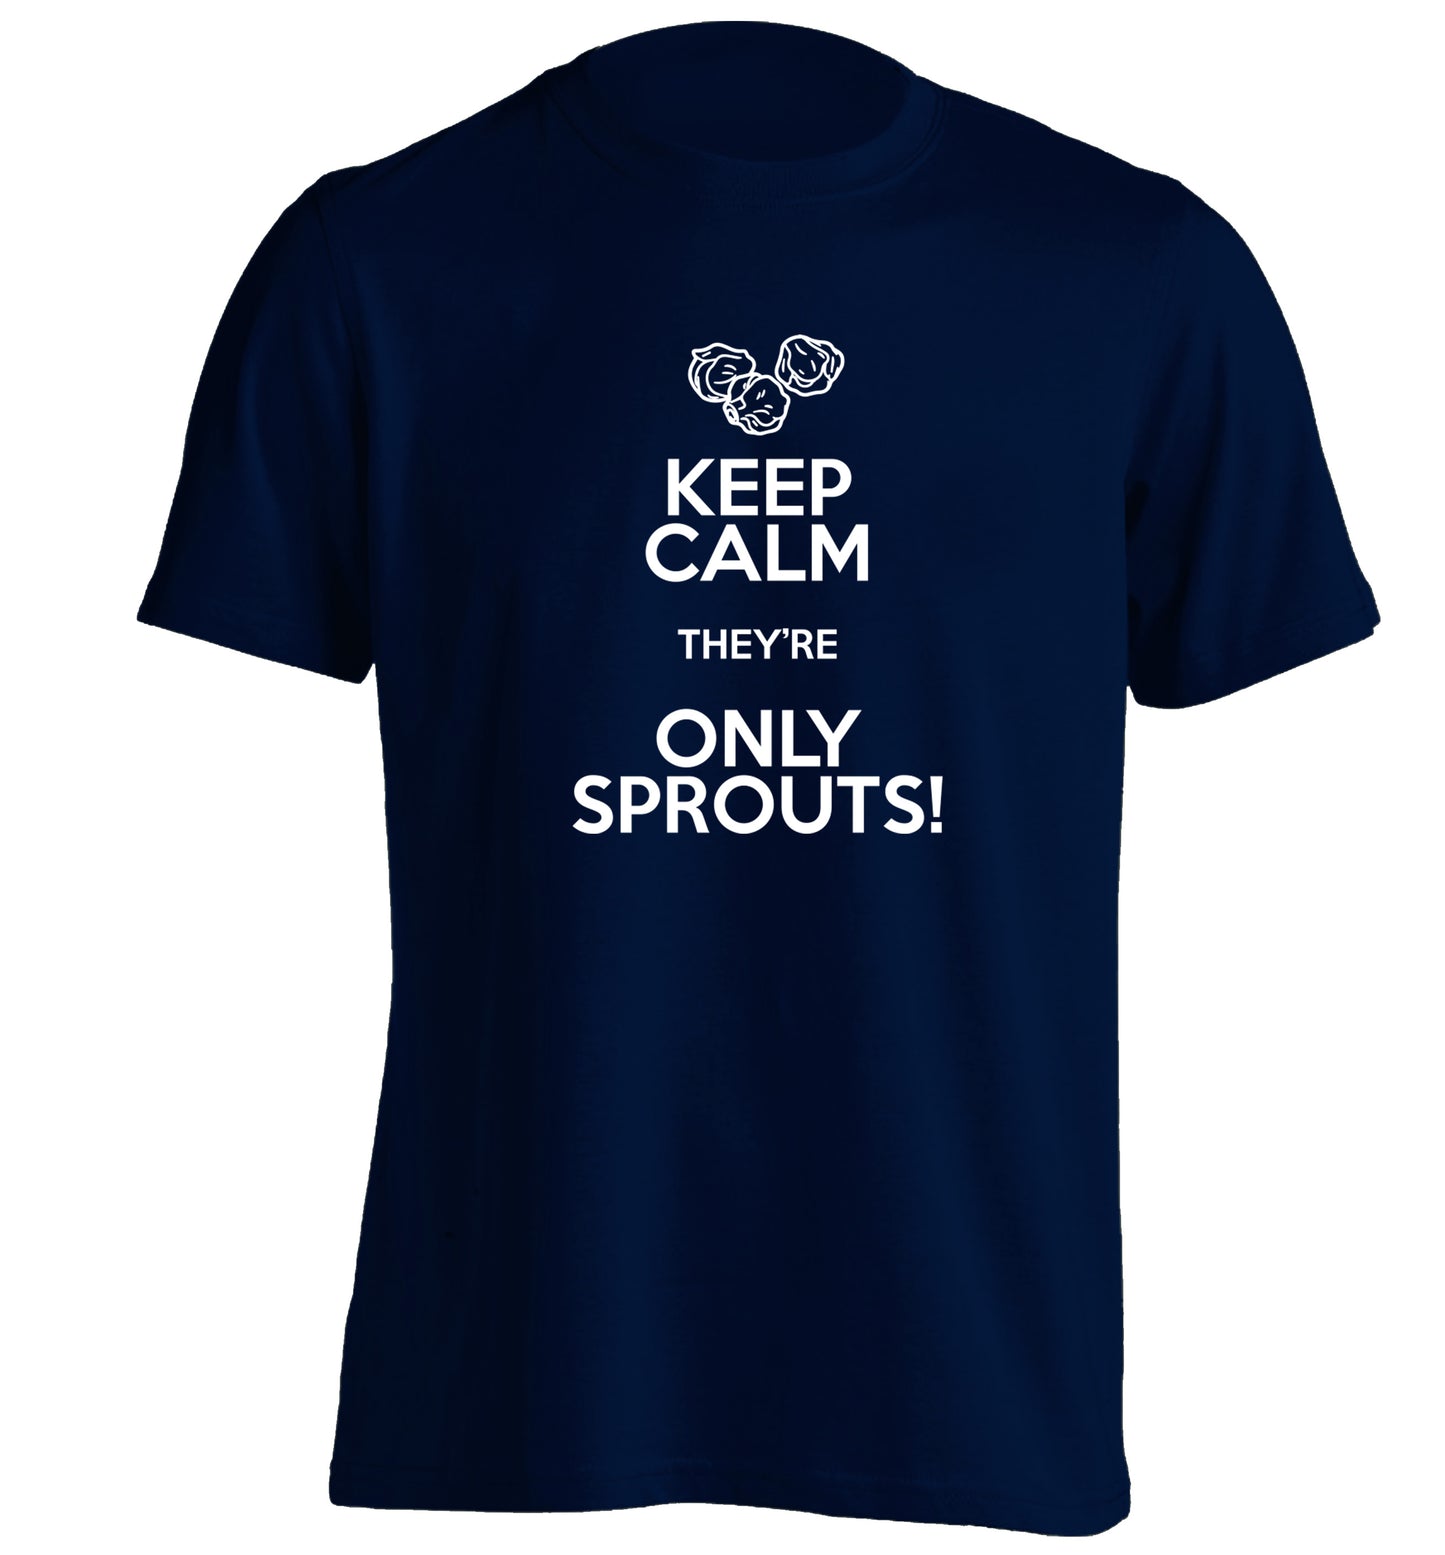 Keep calm they're only sprouts adults unisex navy Tshirt 2XL